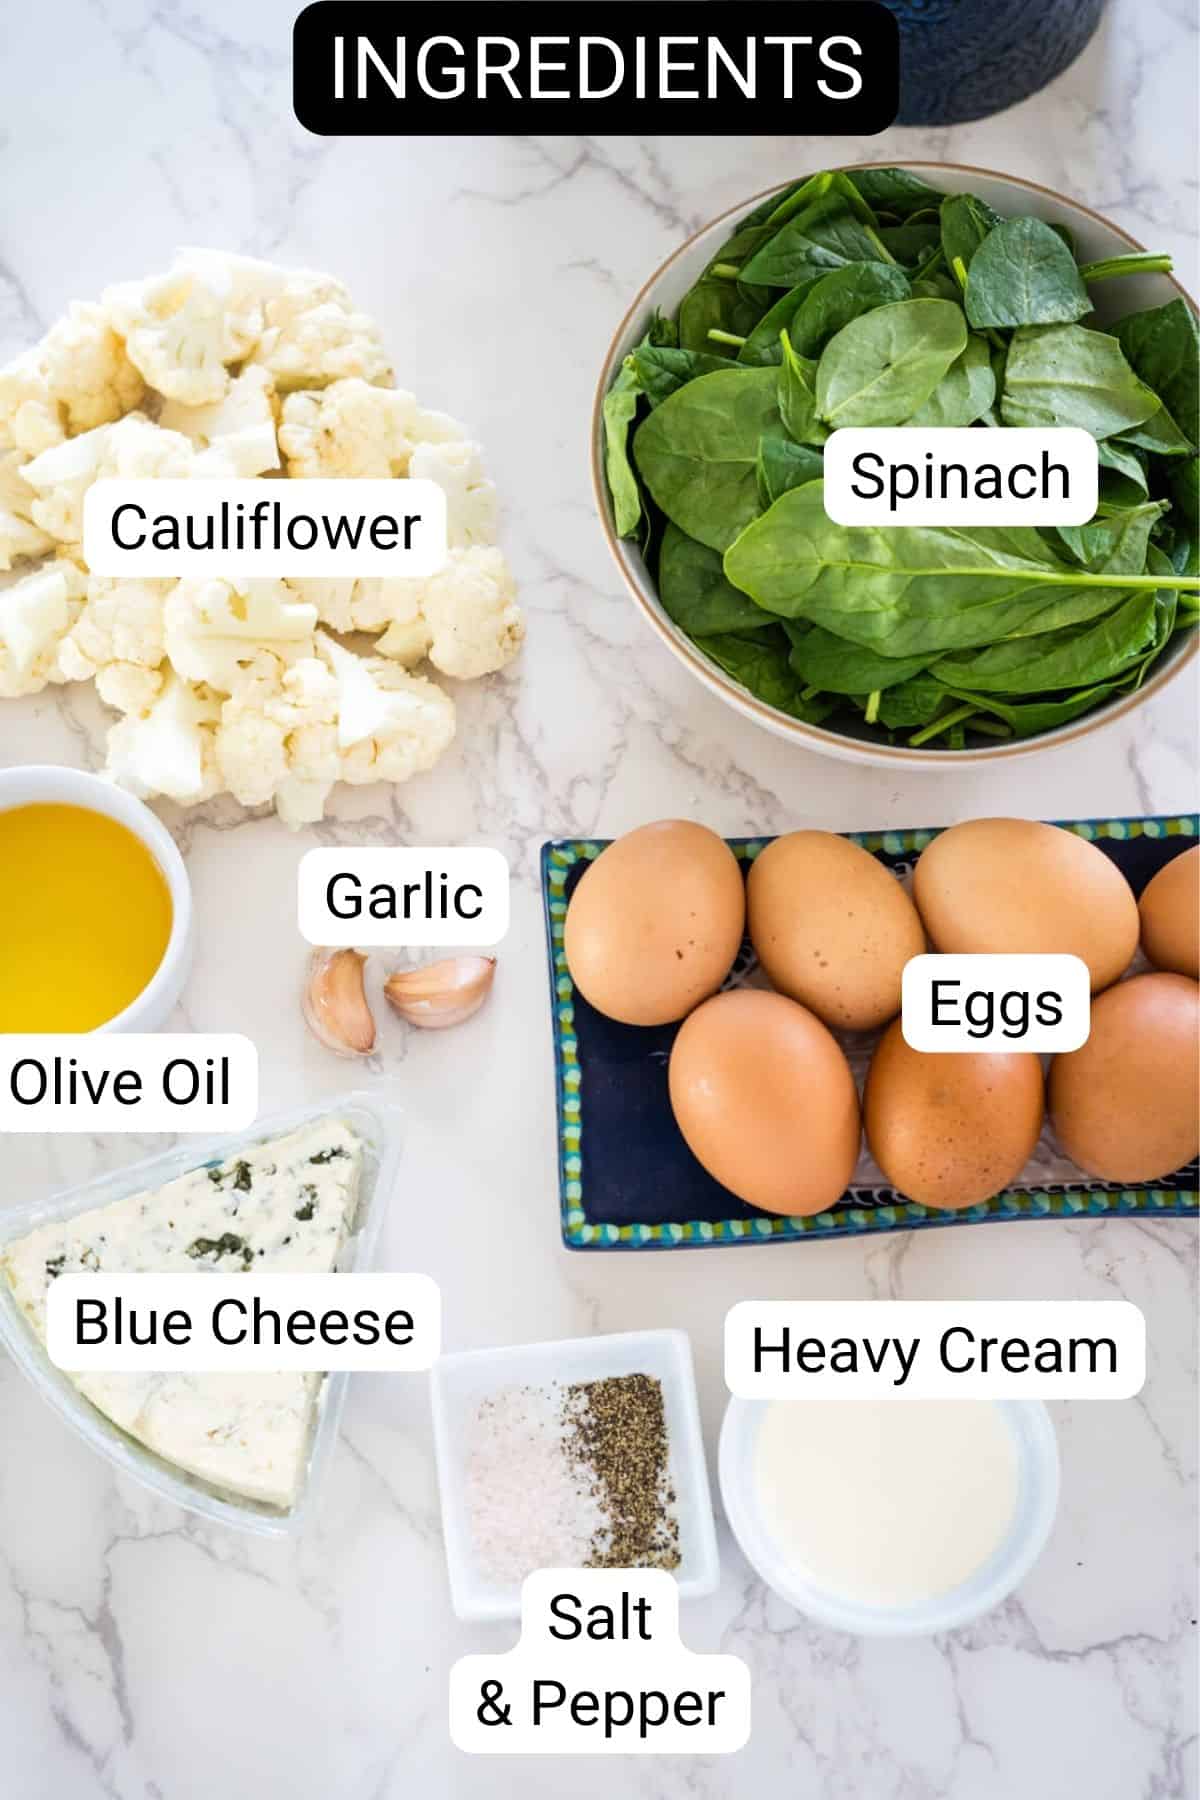 A list of ingredients for a spinach frittata.